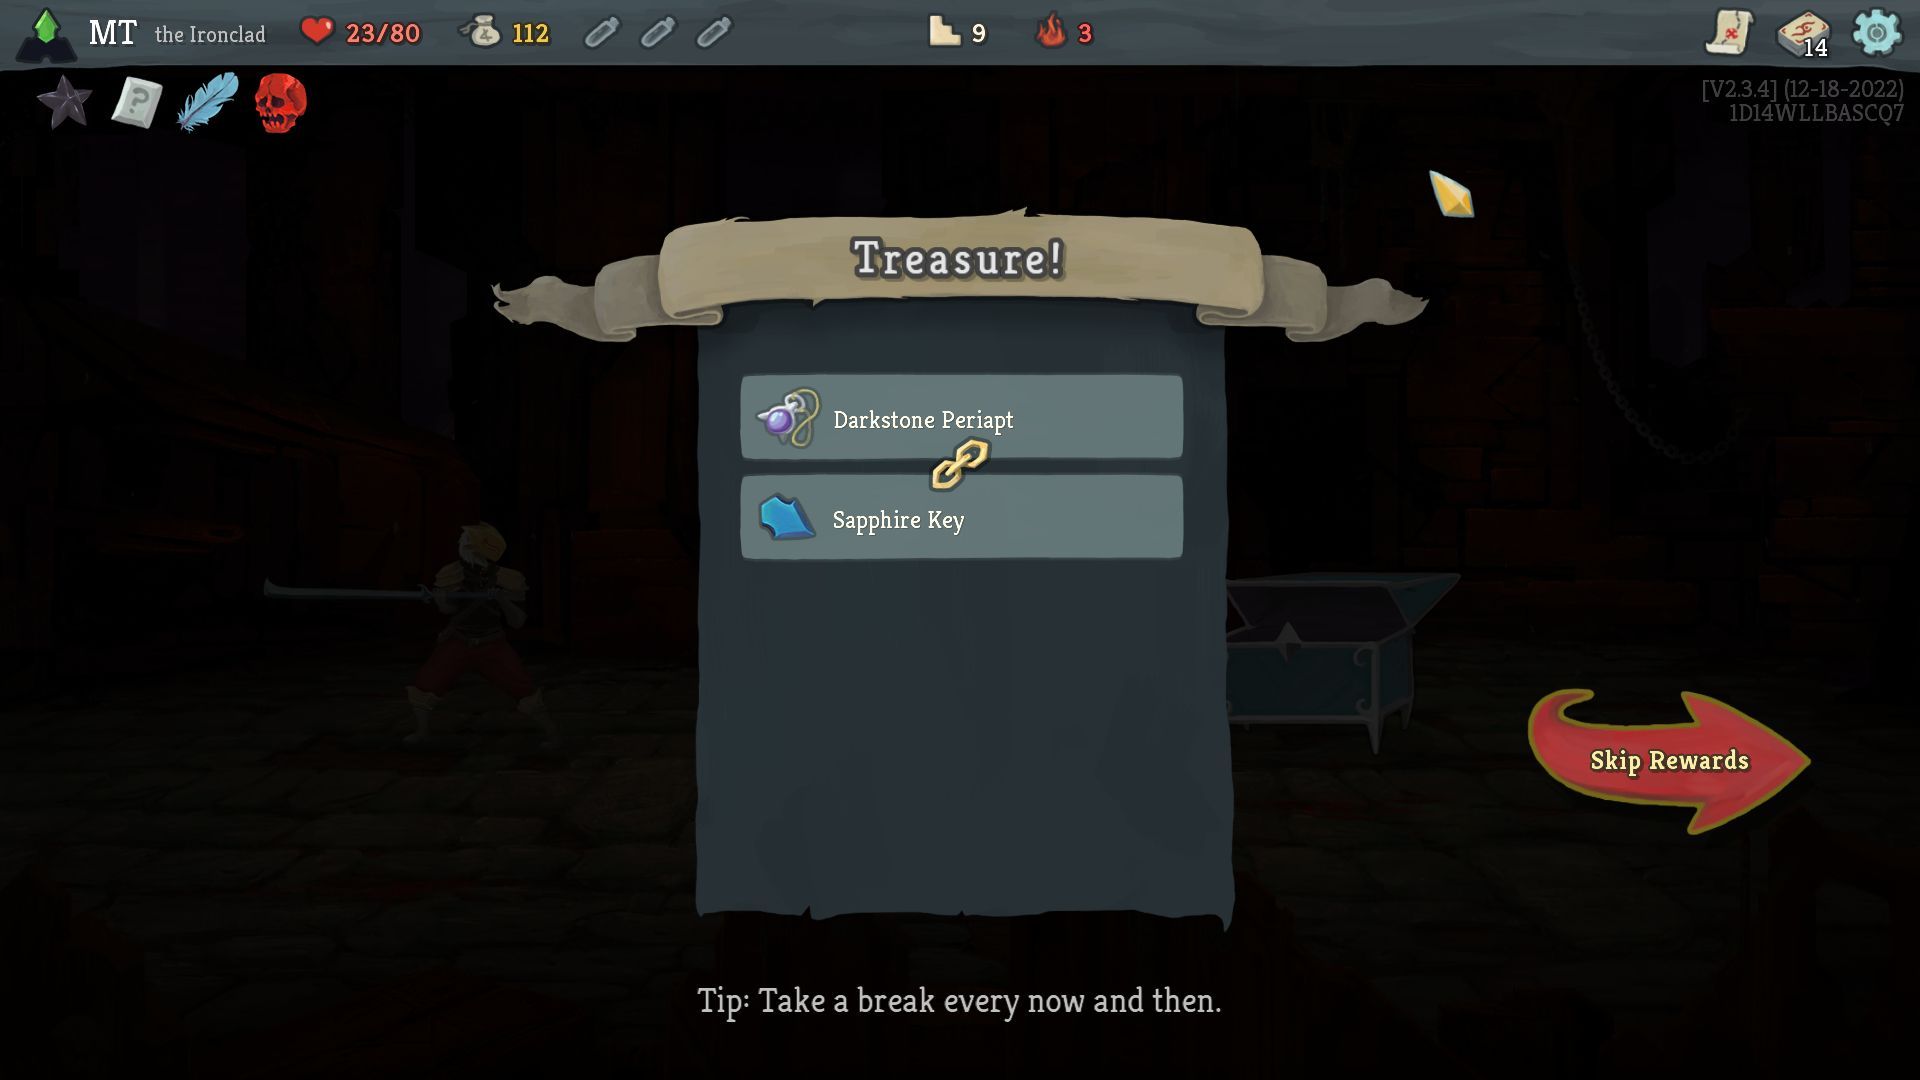 Slay The Spire’s Sapphire Key being offered as an alternative to the relics in a chest.